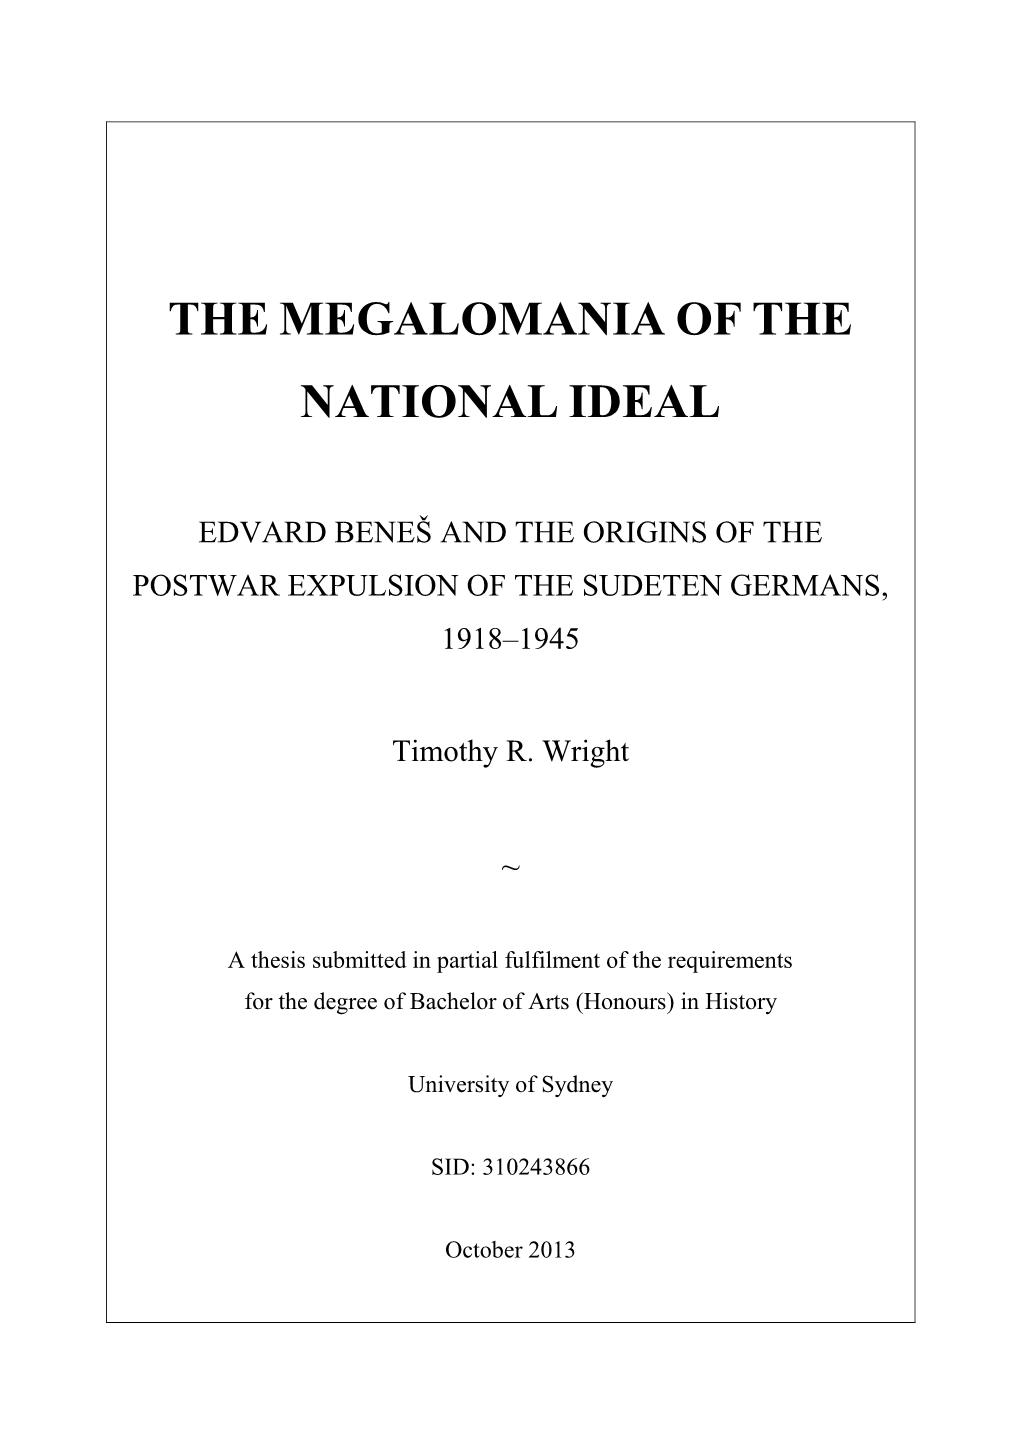 The Megalomania of the National Ideal